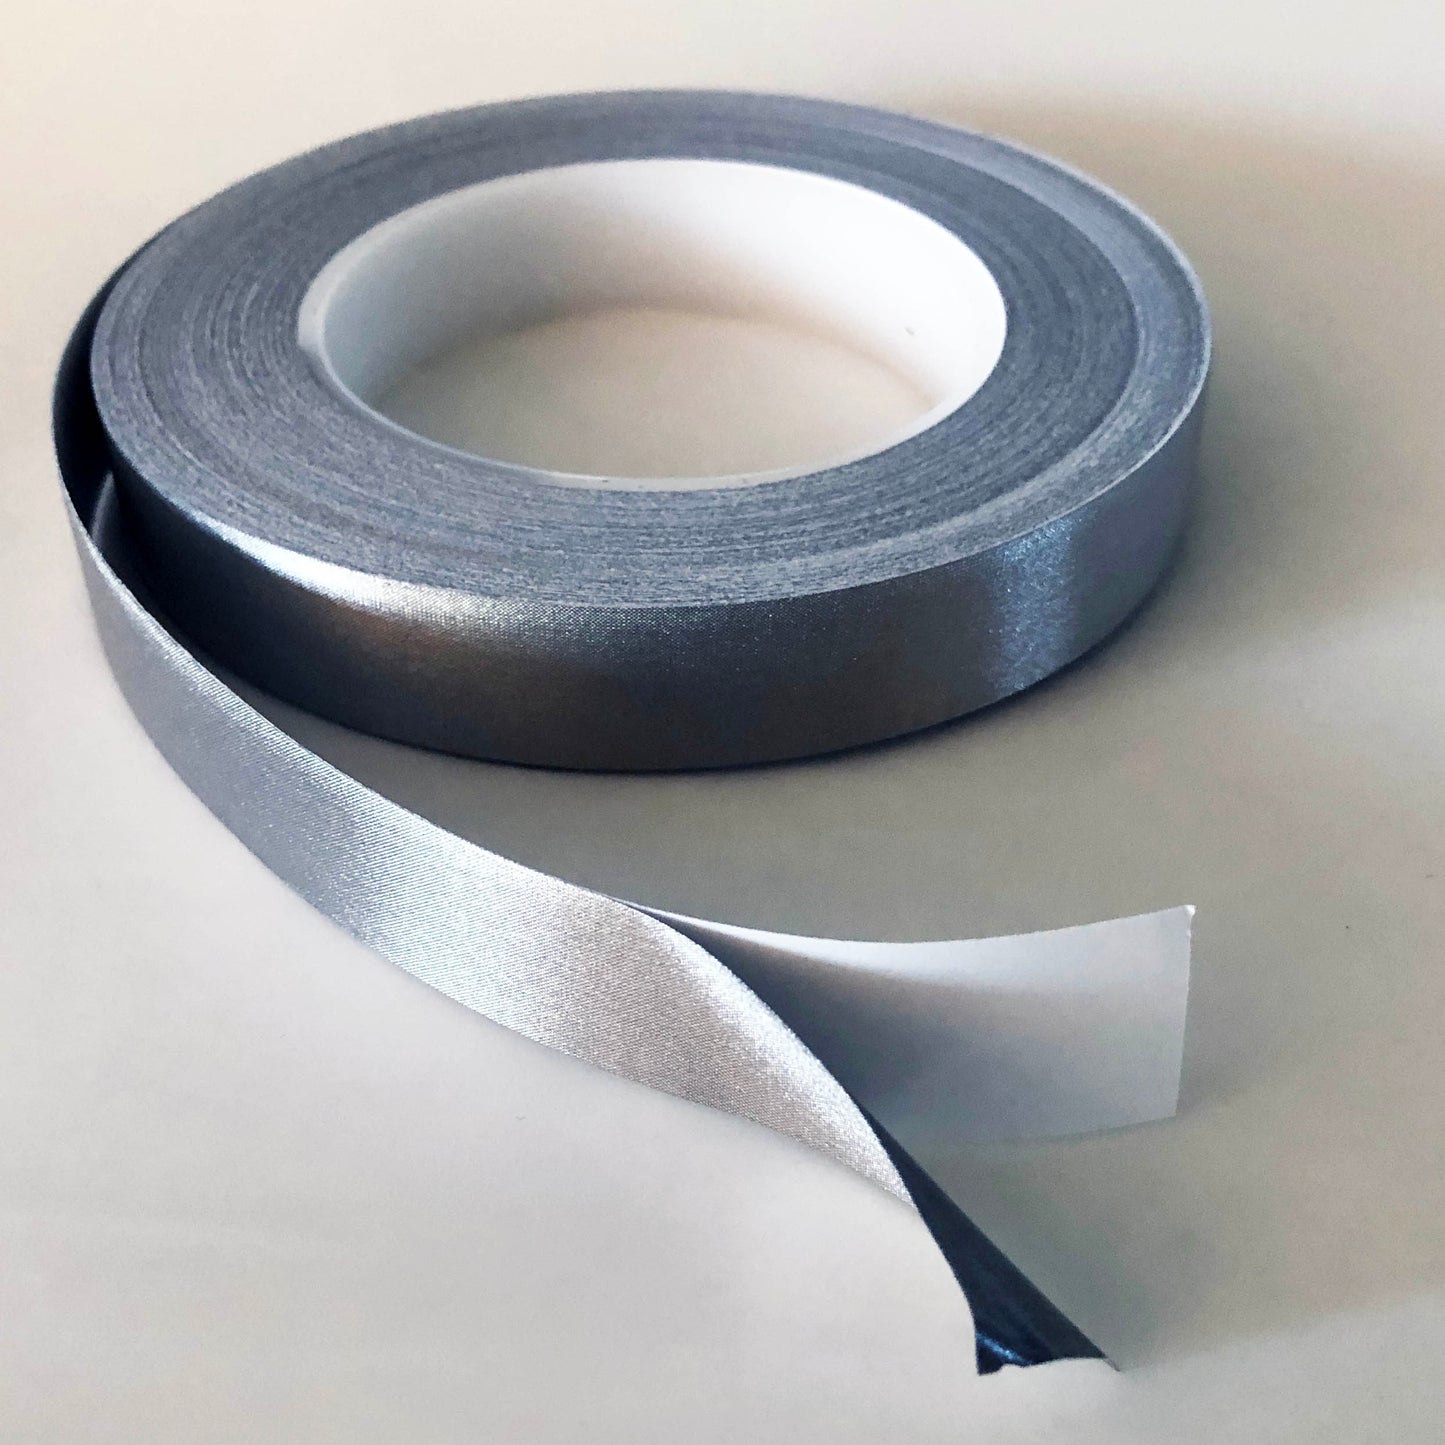 A Role of conductive tape which is open. There is an inch at the end showing the silver conductive tape separated from the white backing.